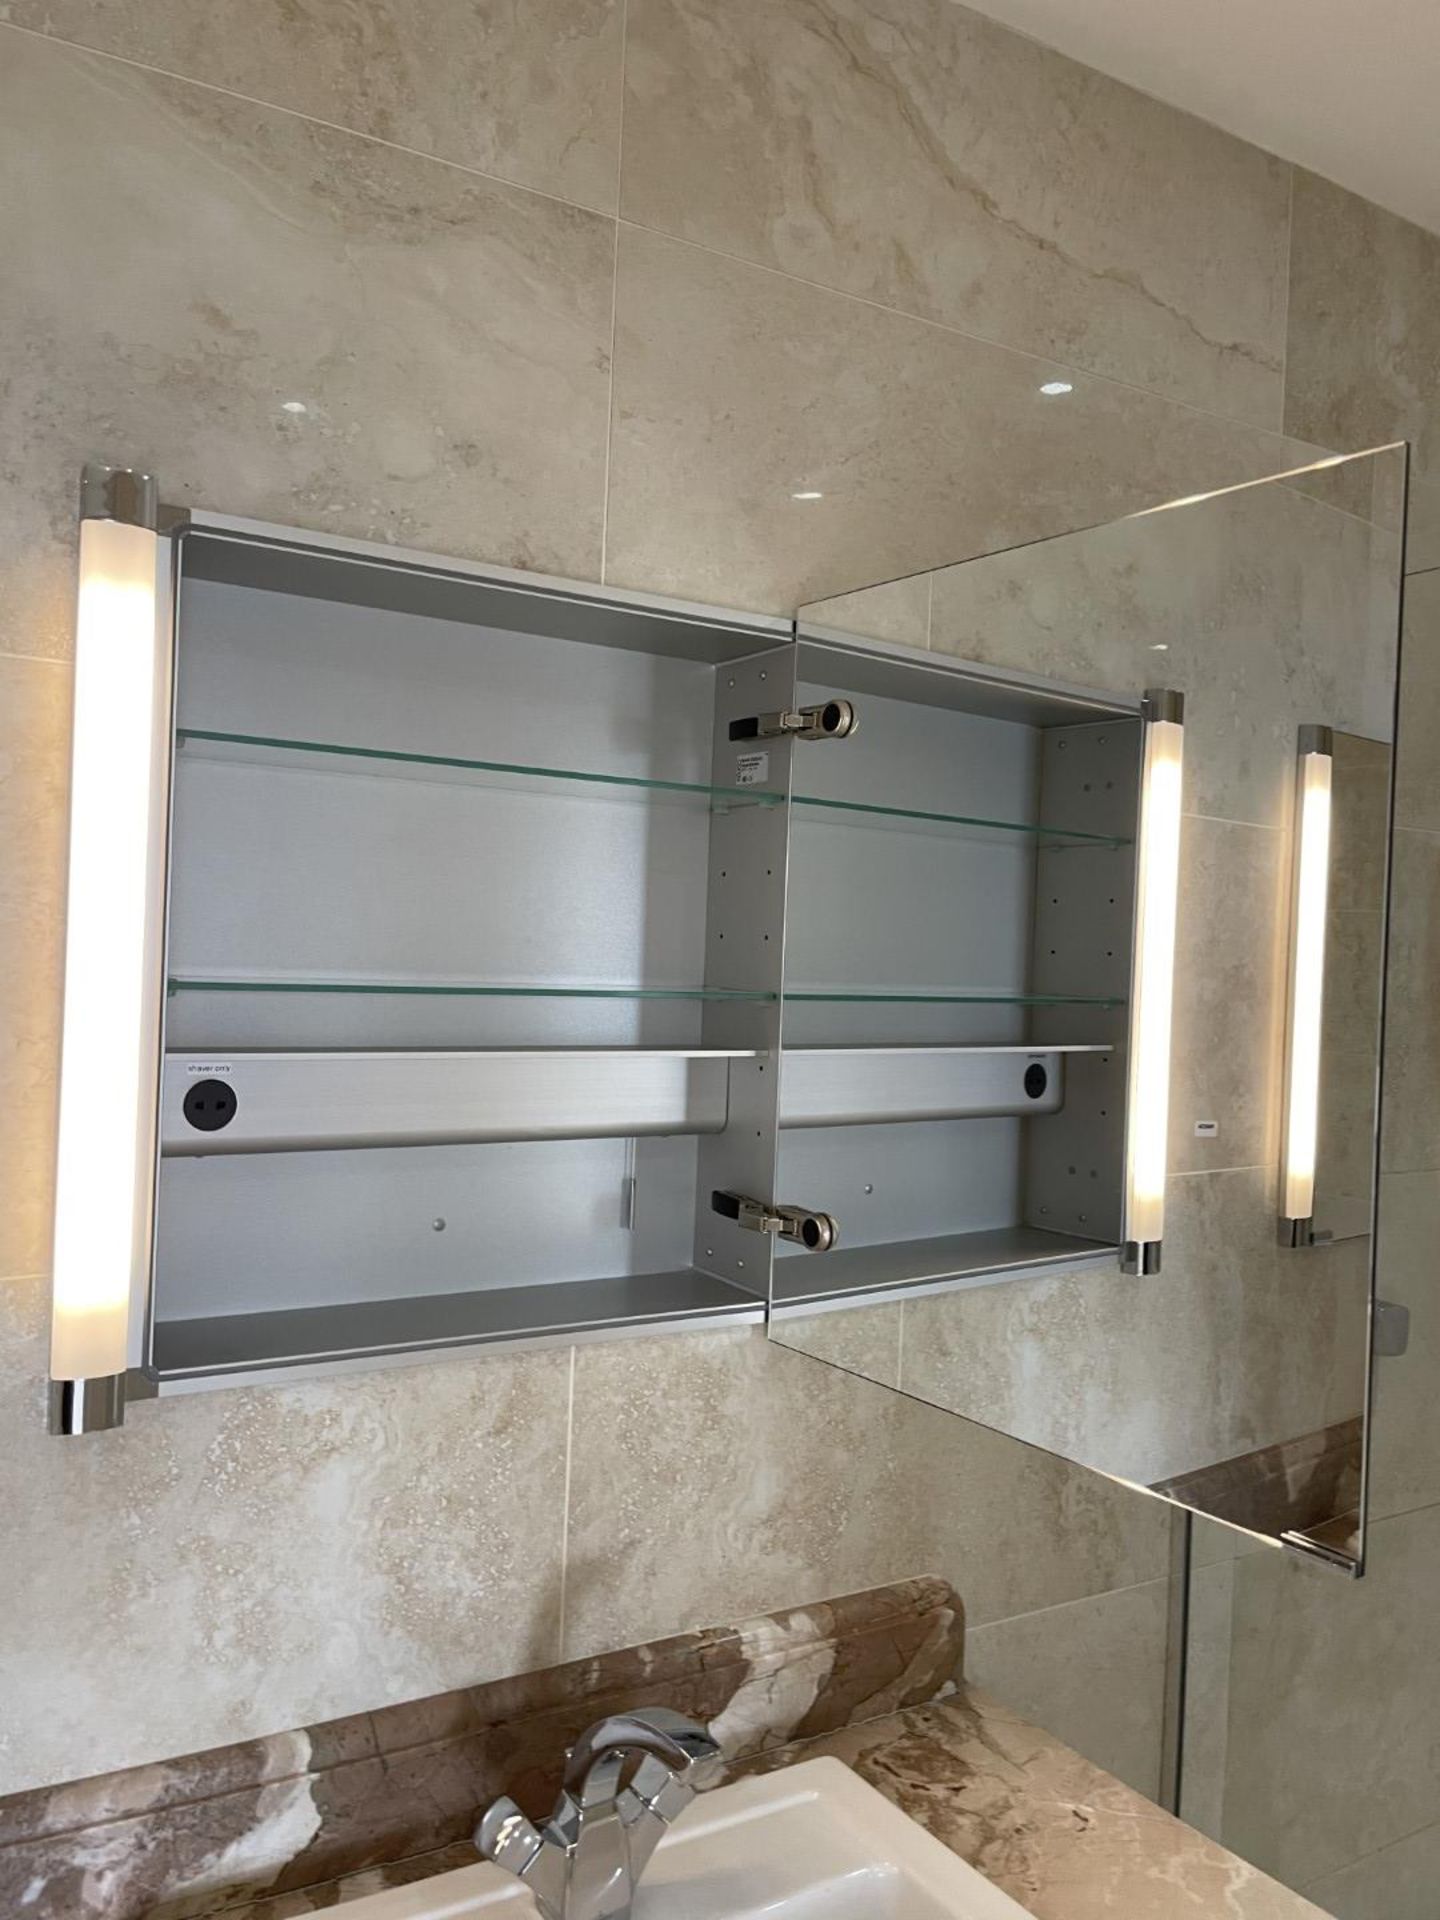 2 x KEUCO Illuminated Mirrored Wall Mounted Cabinets - Total Original Value: £2,000 - Ref: - Image 16 of 19